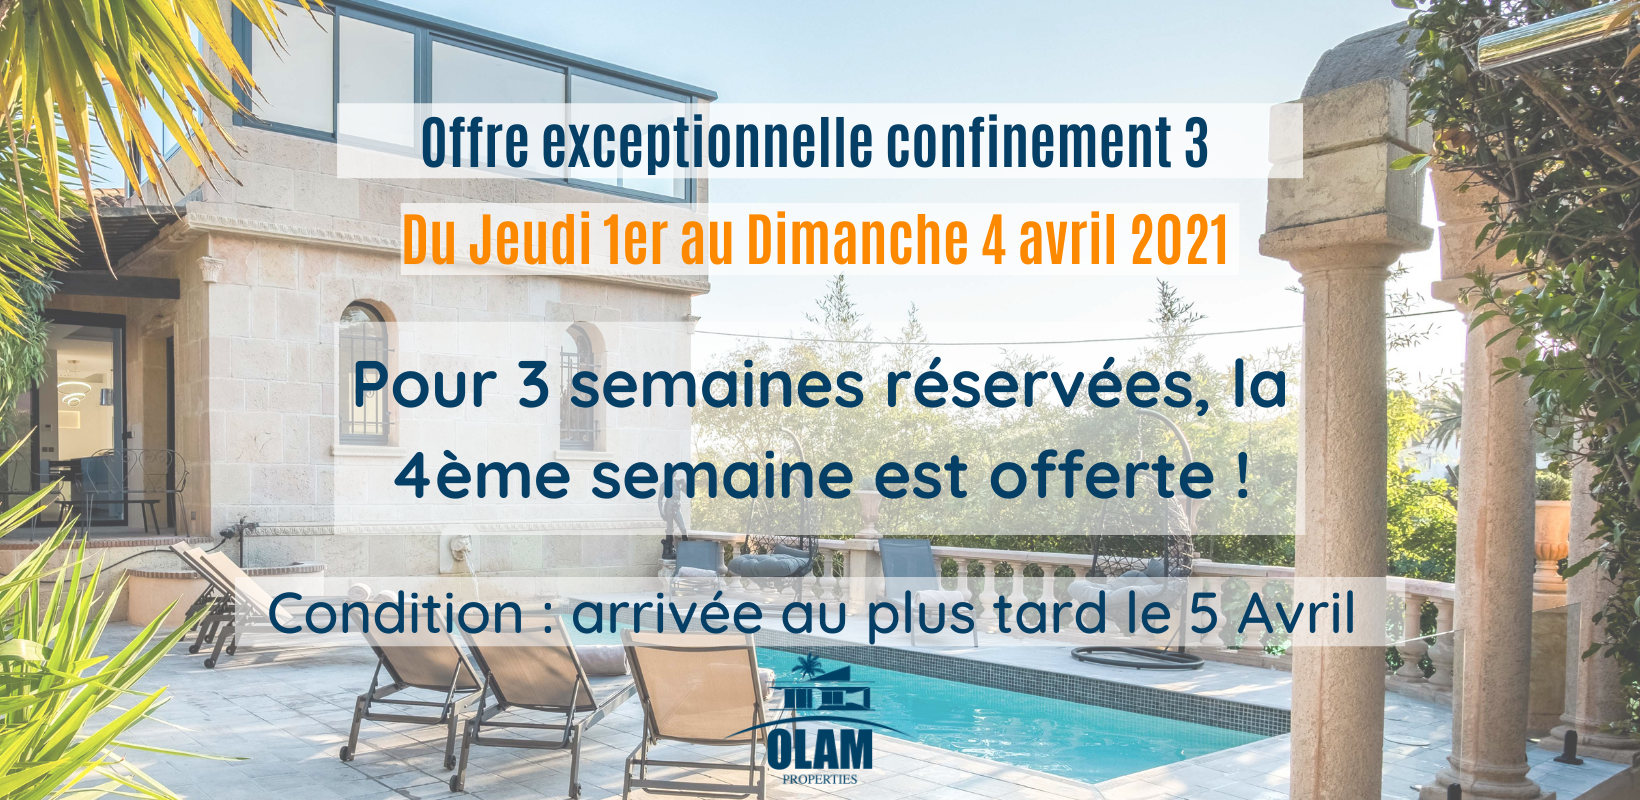 Offre exceptionnelle Olam Properties Cannes